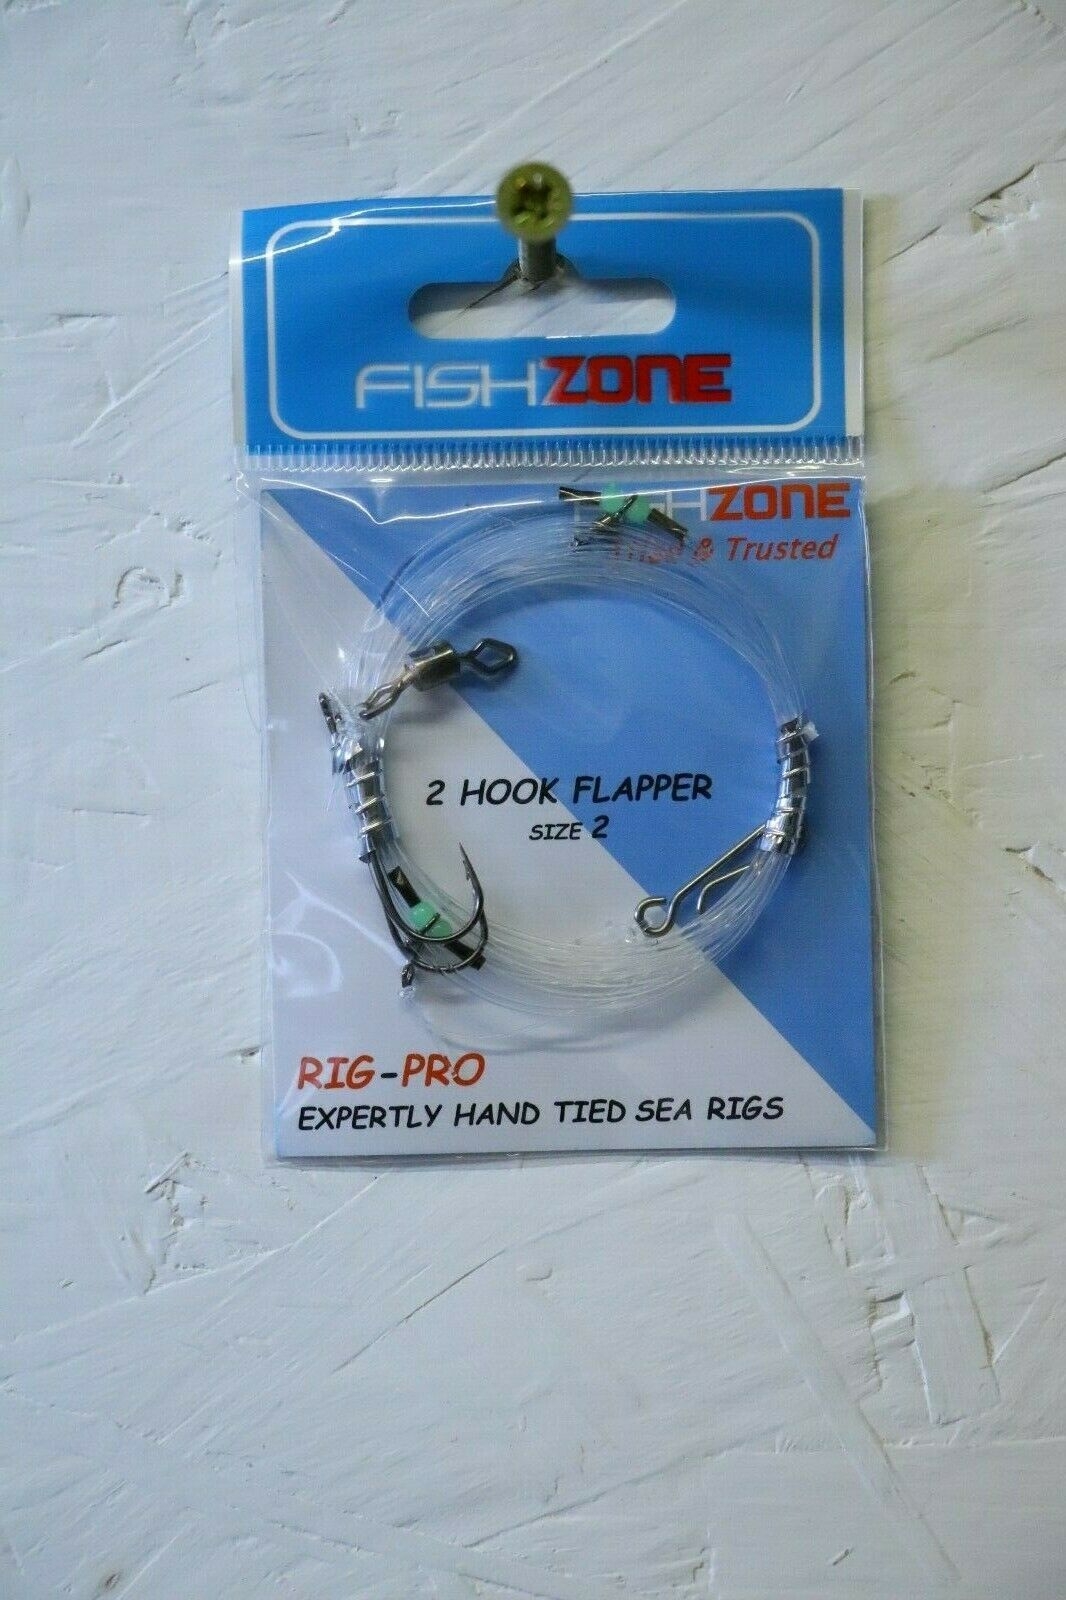 FishZone 2 hook flapper size 2 scratching rig sea fishing rig